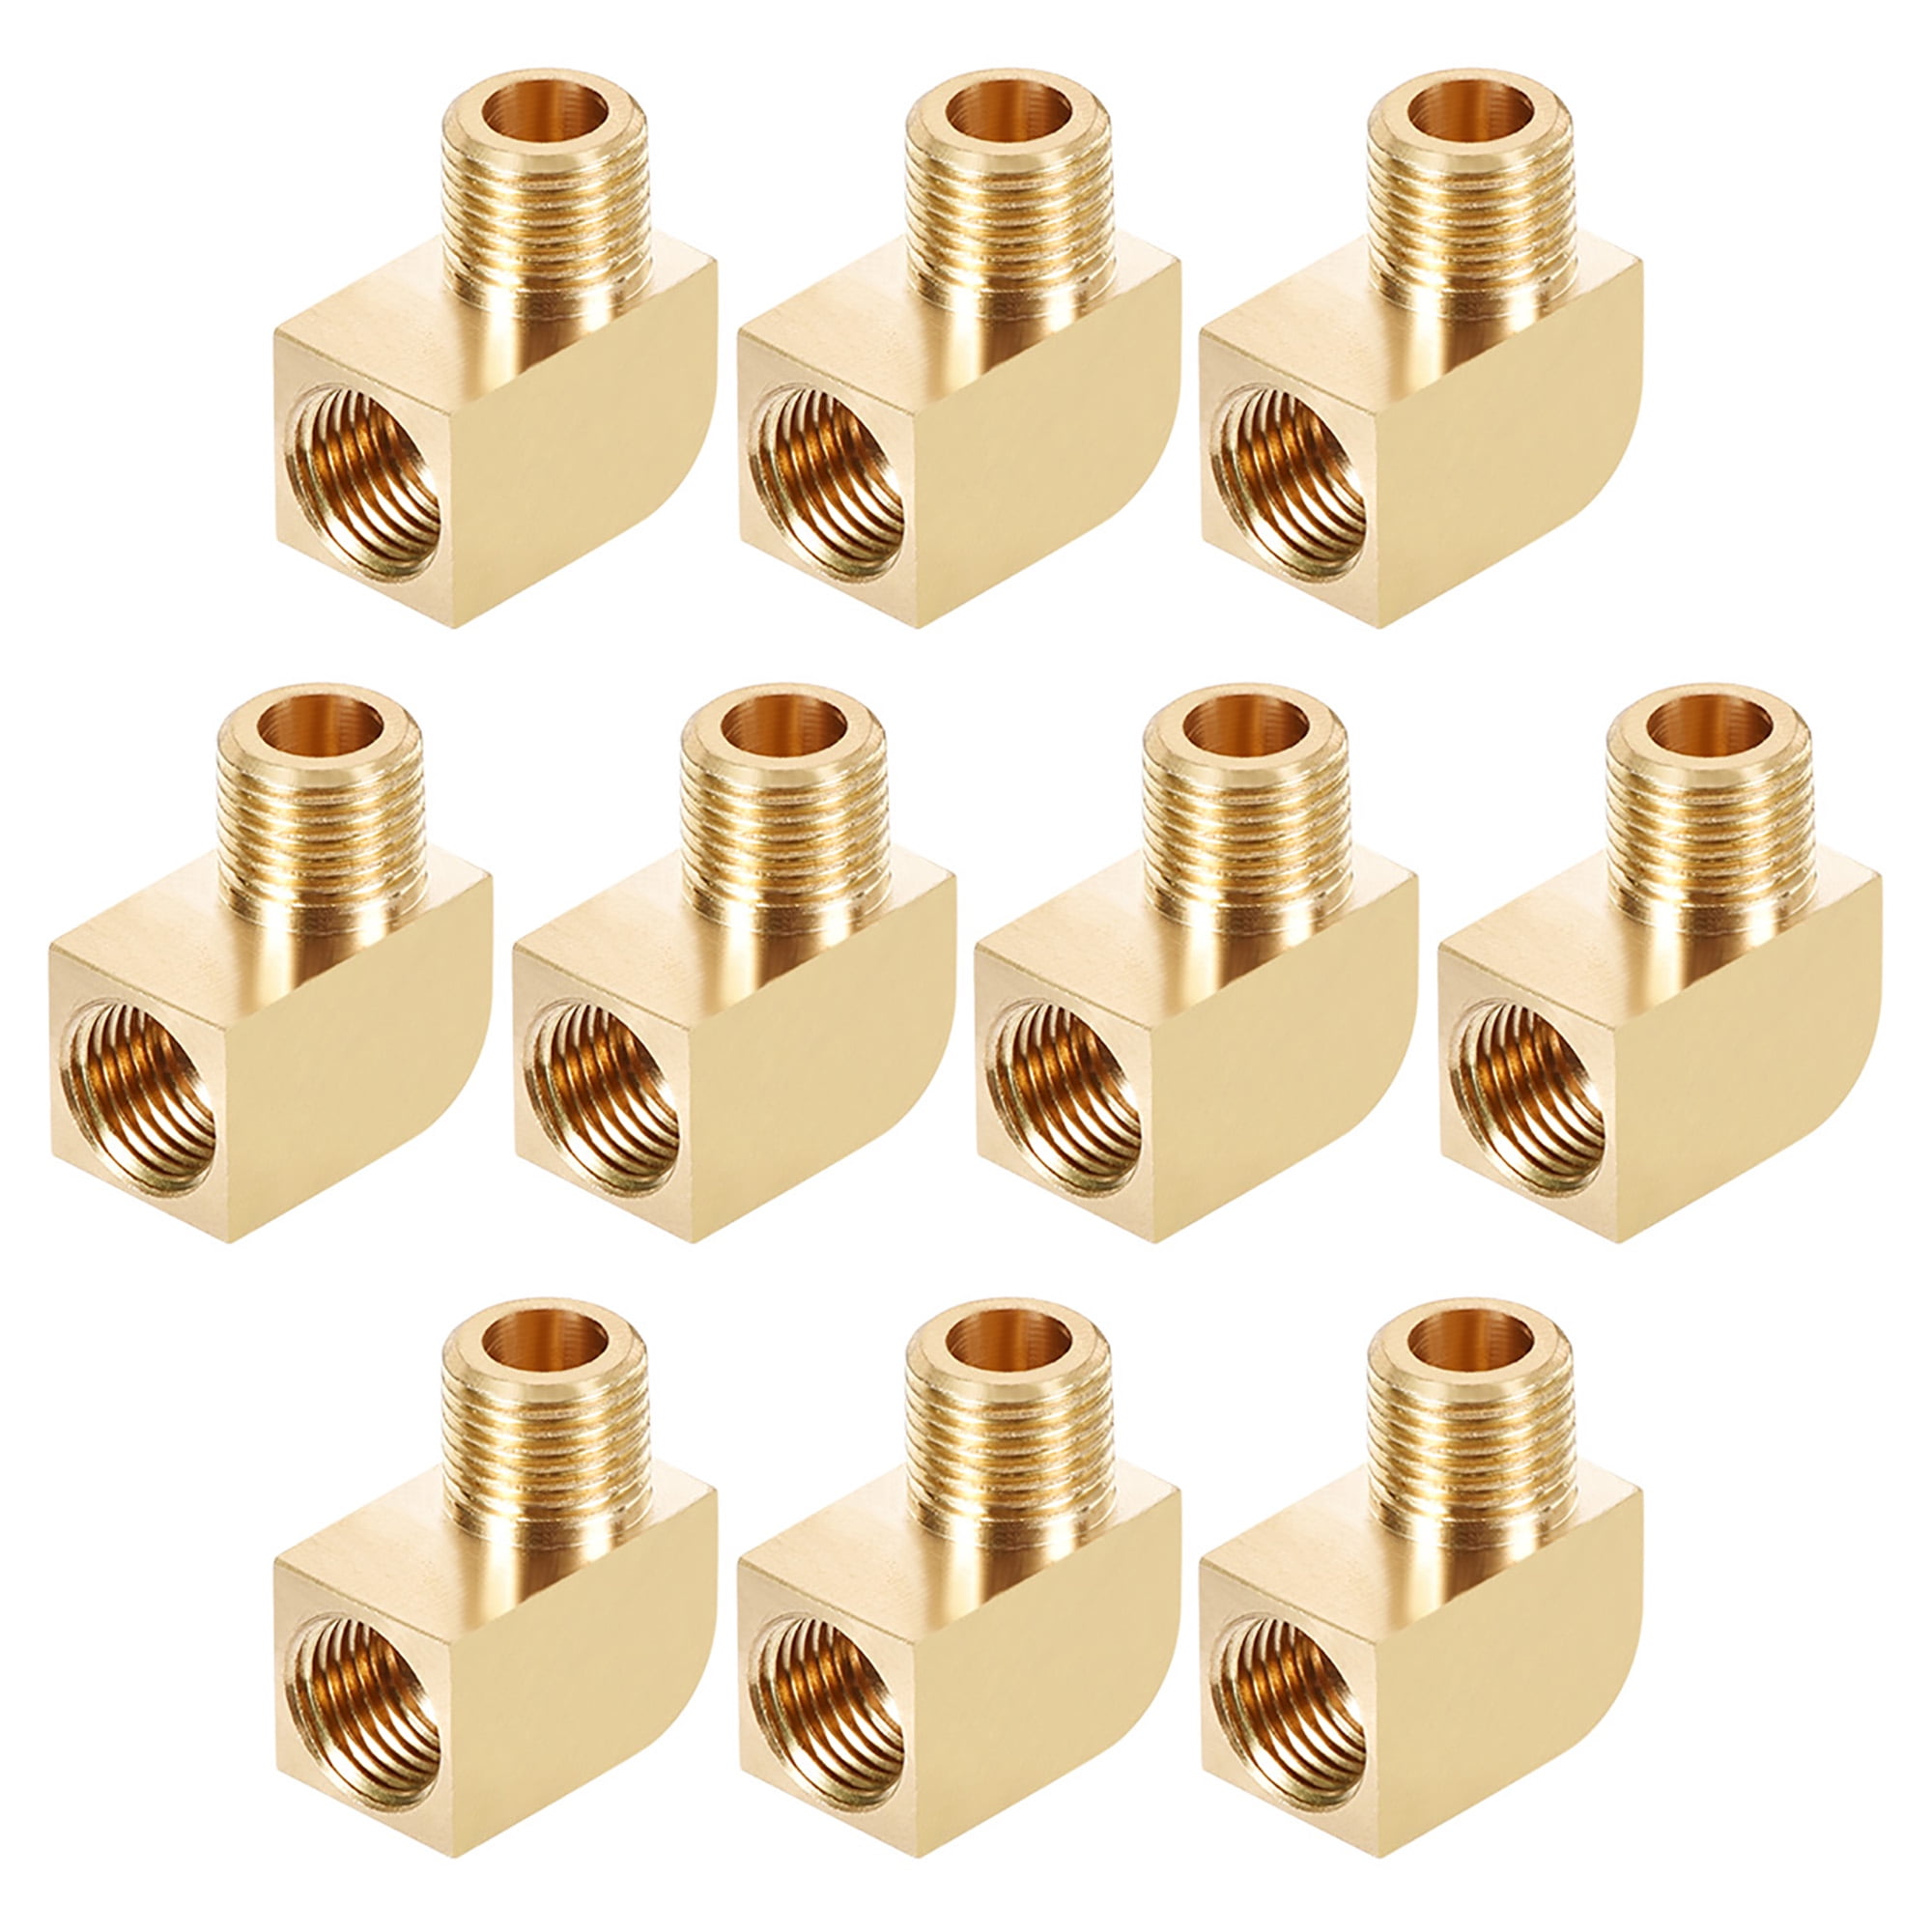 Details about   Brass Pipe Fitting 90 Degree Barstock Street Elbow  M10 MalexG1/8 Female 5pcs